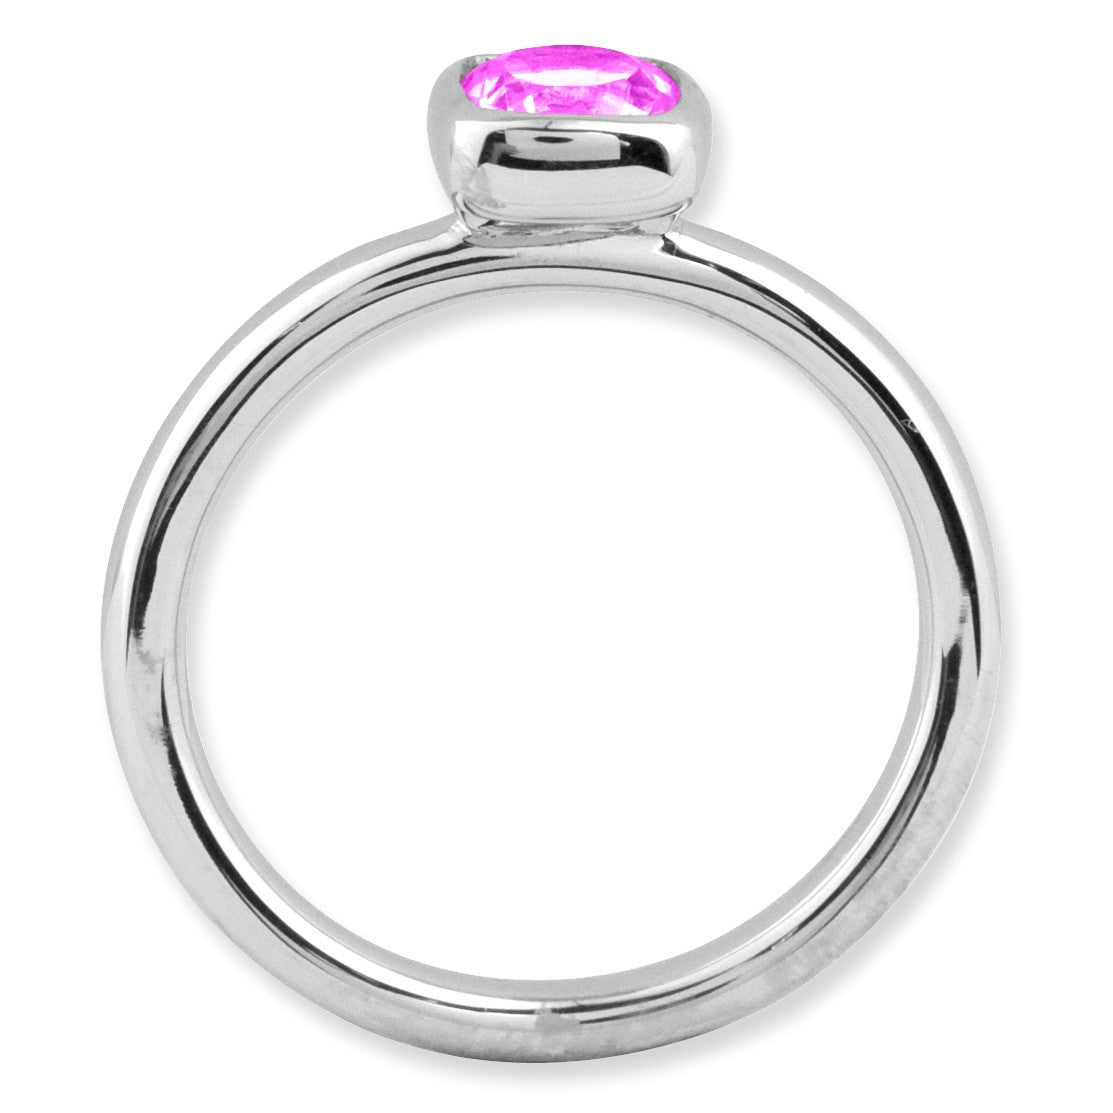 Alternate view of the Silver Stackable Cushion Cut Pink Tourmaline Solitaire Ring by The Black Bow Jewelry Co.